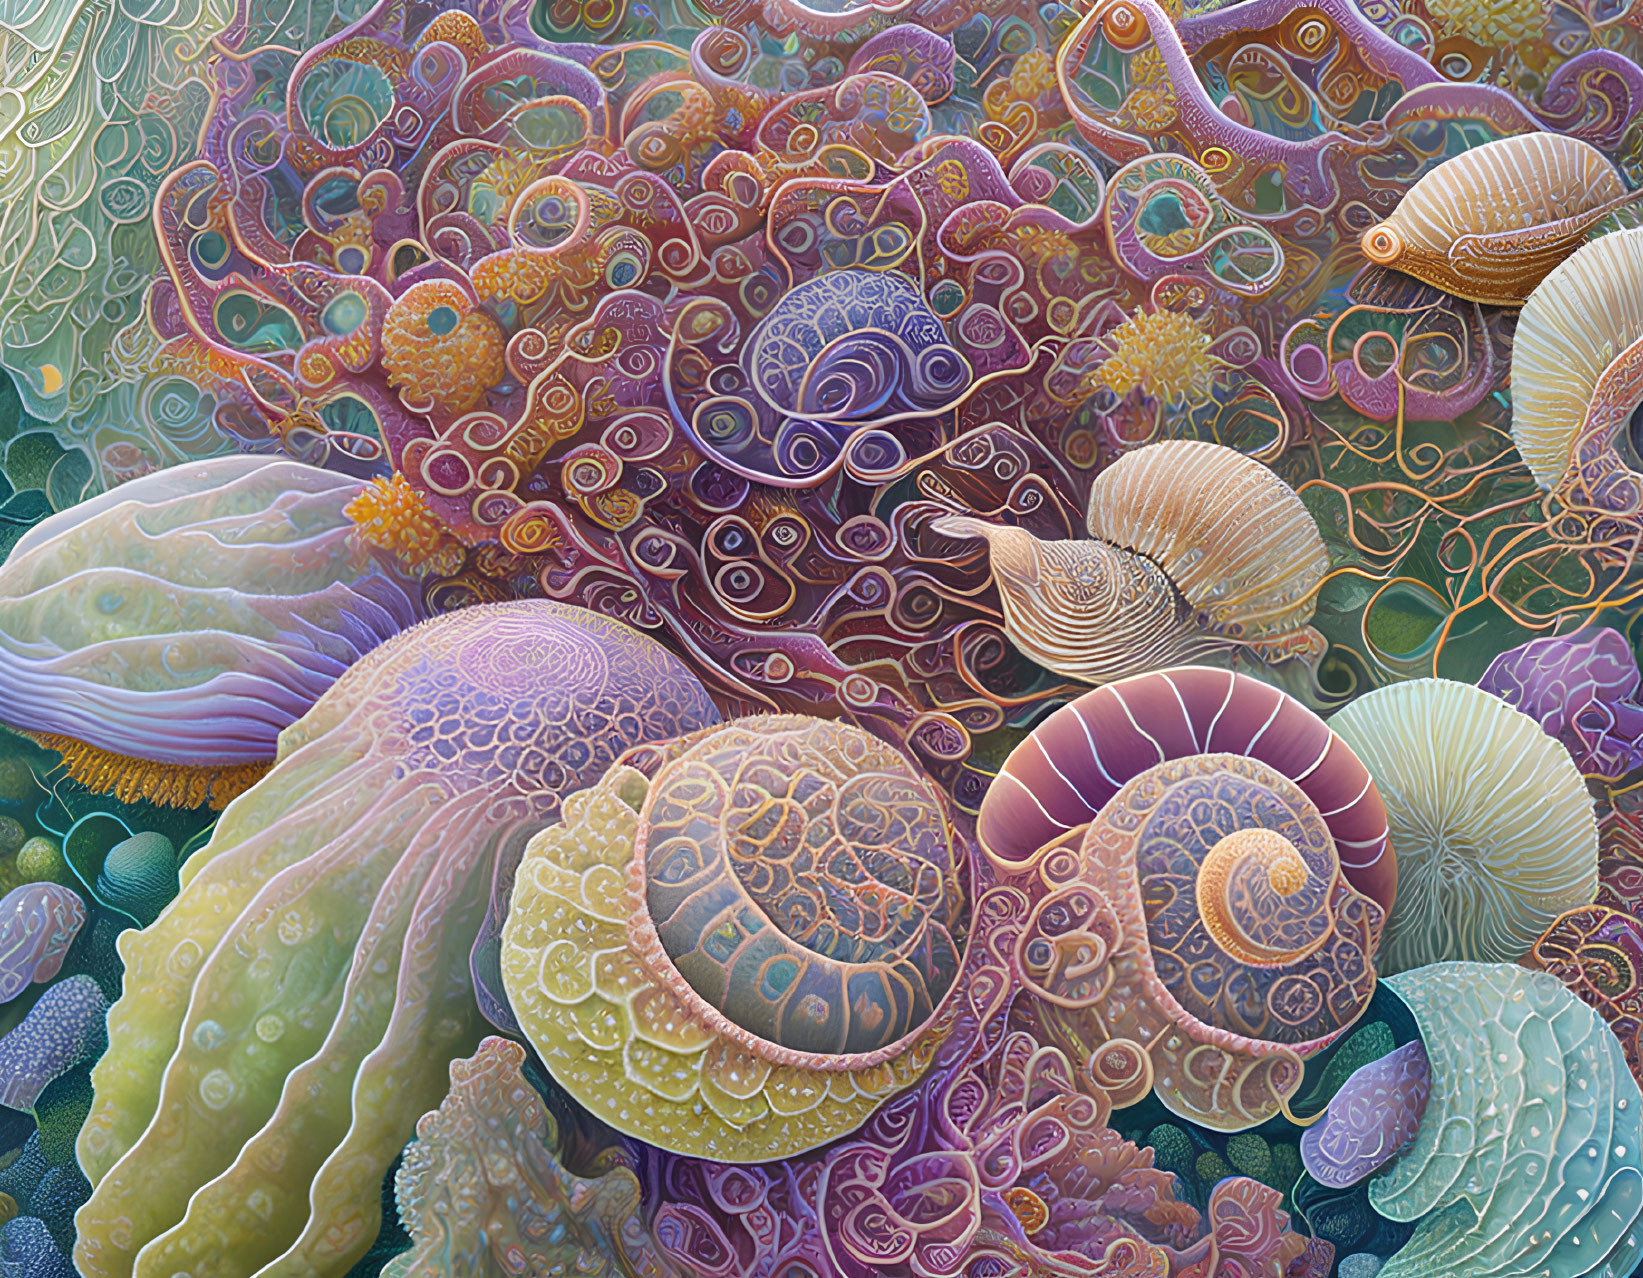 Colorful Stylized Marine Life Artwork in Swirling Patterns